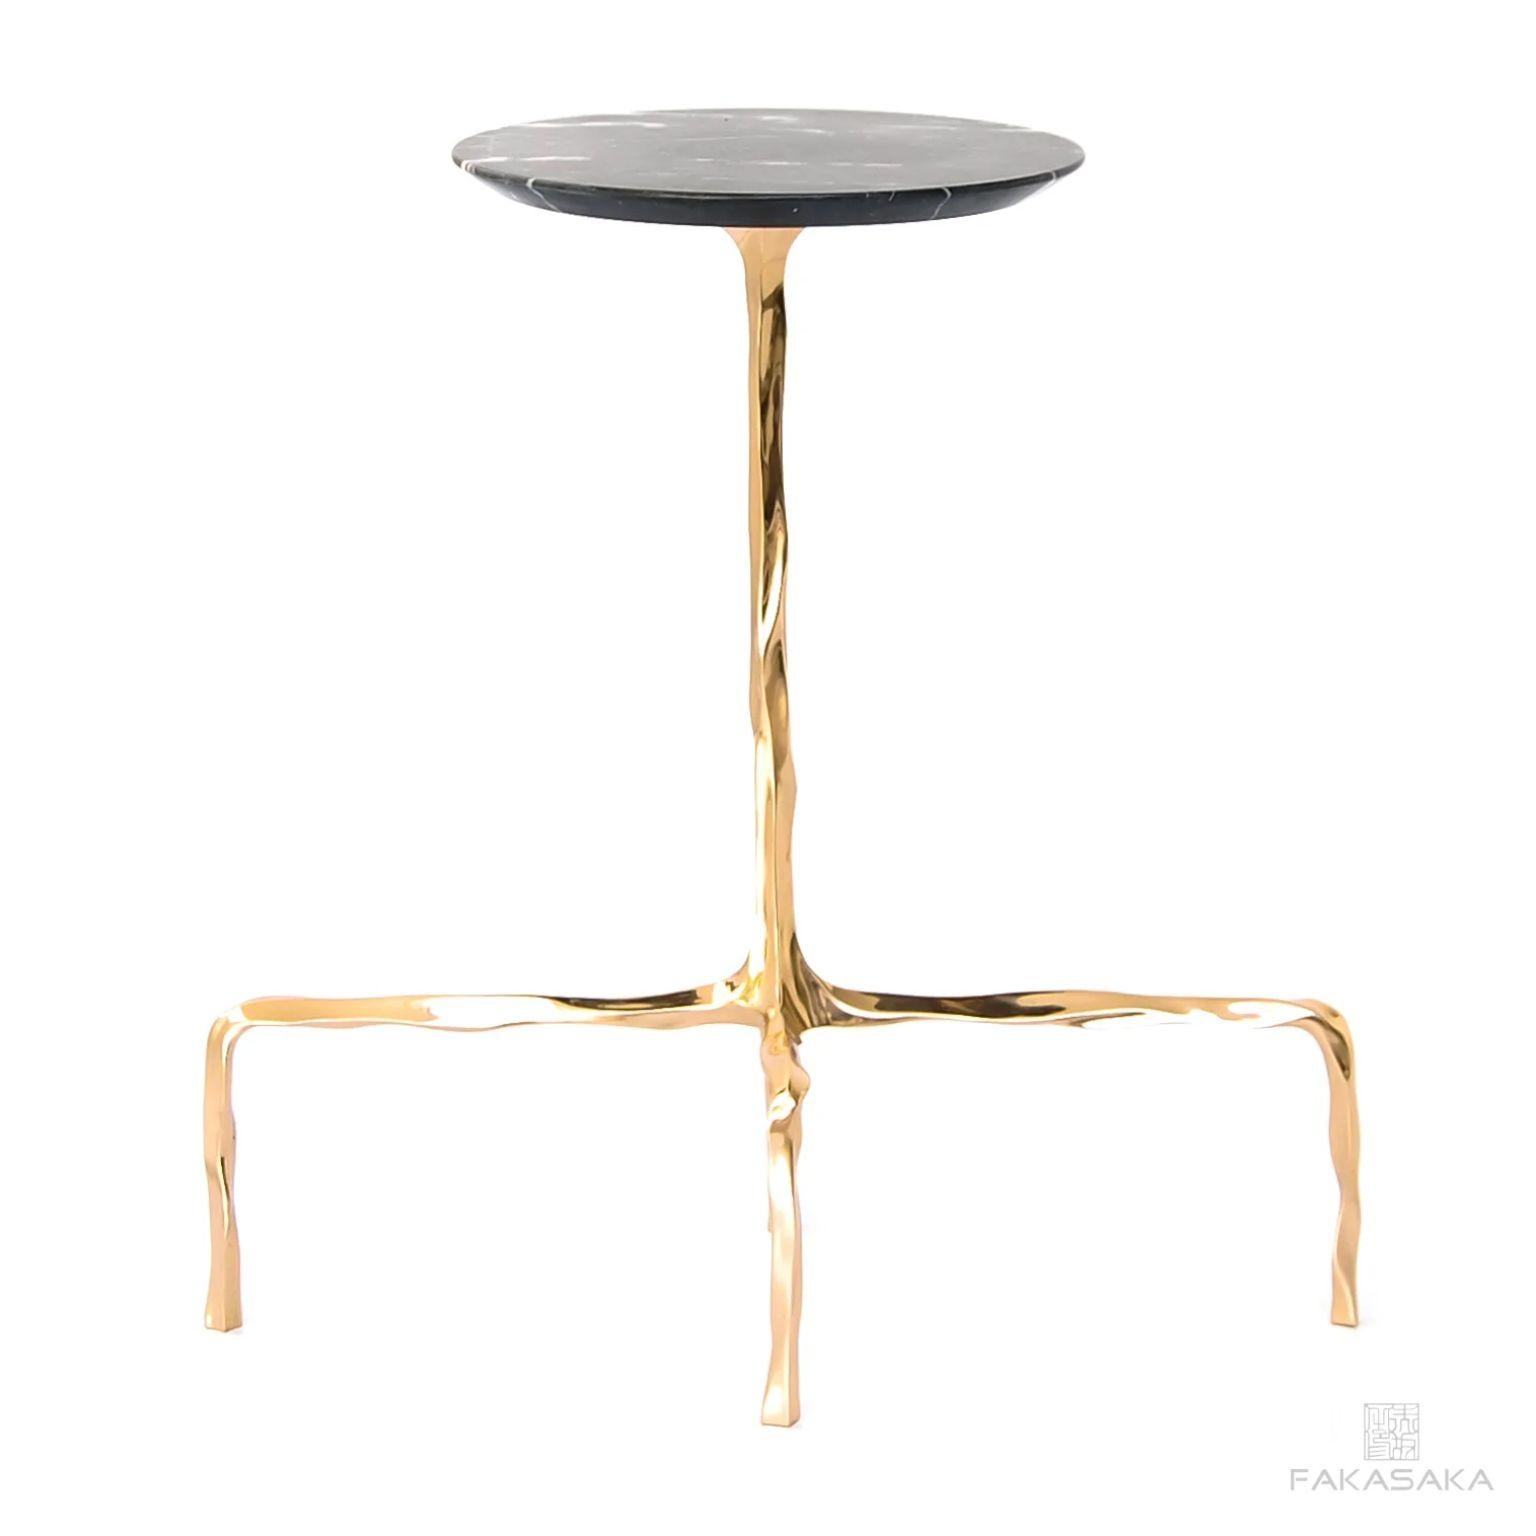 Modern Presley Drink Table with Nero Marquina Marble Top by Fakasaka Design For Sale